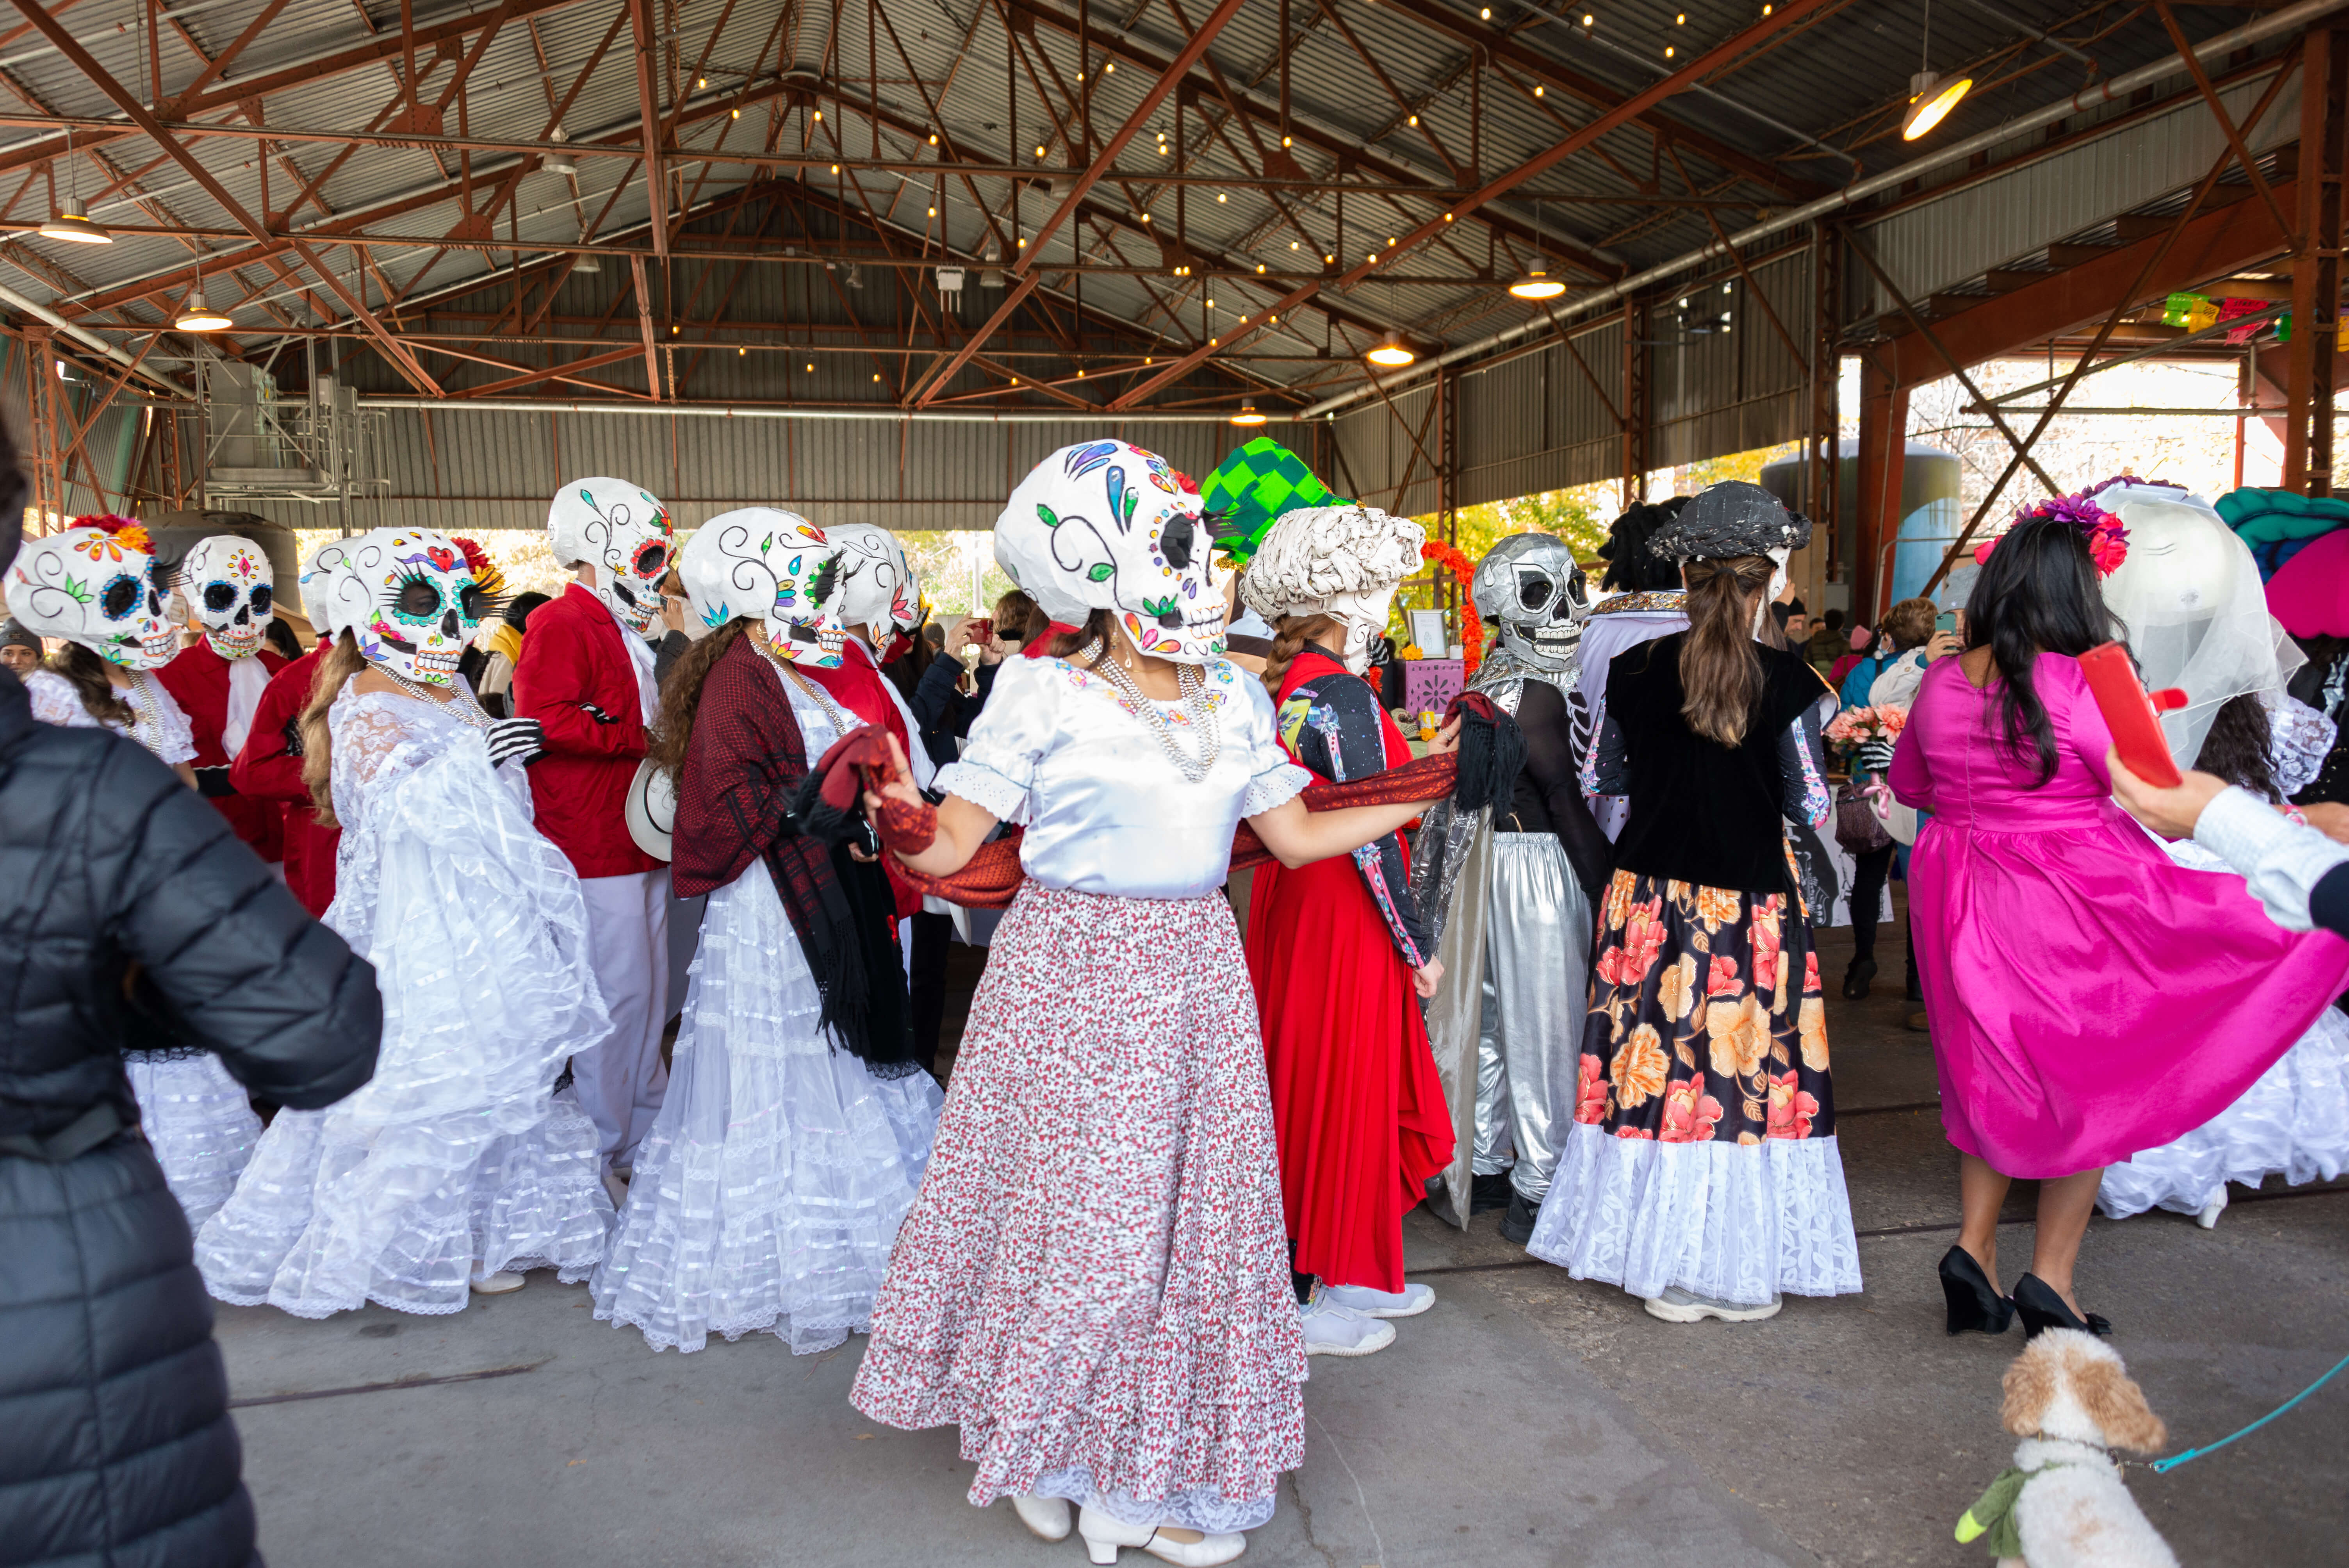 group of people dancing in costumes